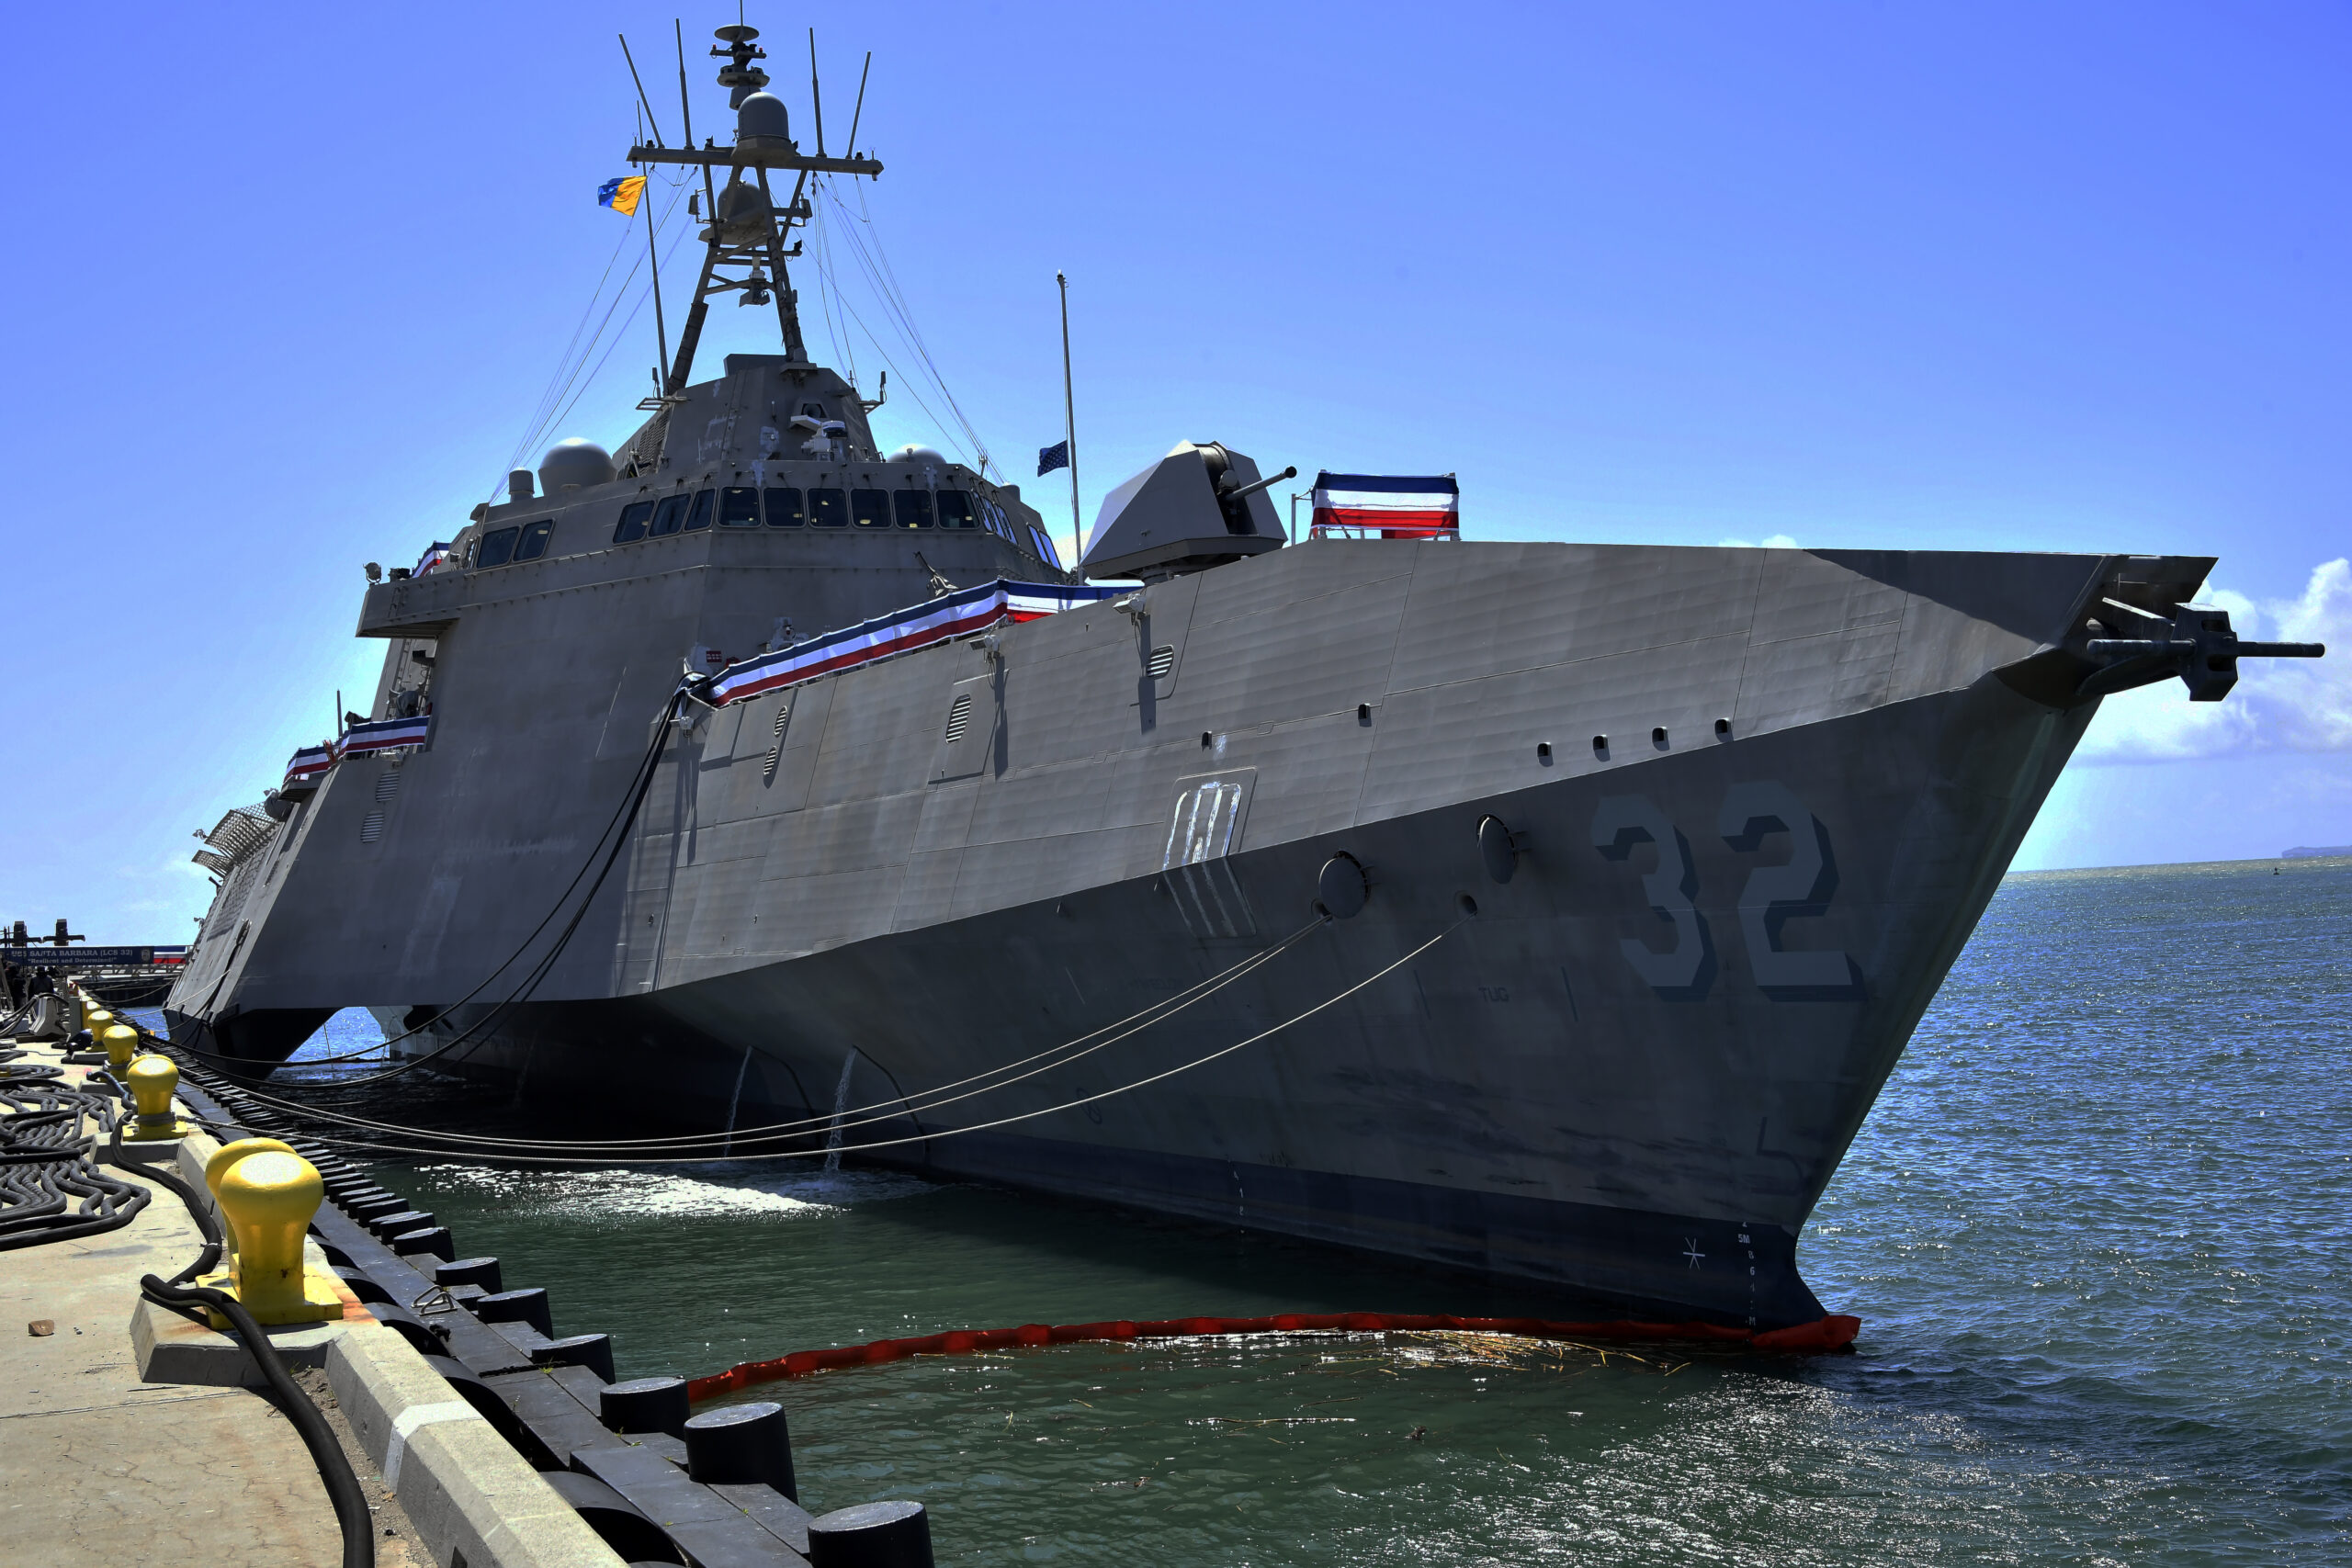 230331-N-AS200-0021 PORT HUENEME, Calif. (Mar. 31, 2023) The Independence-class variant littoral combat ship USS Santa Barbara (LCS32), is in port onboard Naval Base Ventura County (NBVC) for her Commissioning Ceremony, Mar. 31. NBVC is a strategically located Naval installation composed of three operating facilities: Point Mugu, Port Hueneme and San Nicolas Island. NBVC is the home of the Pacific Seabees, West Coast E-2D Hawkeyes, 3 warfare centers and 80 tenants. (U.S. Navy photo by Ensign Drew Verbis/Released)